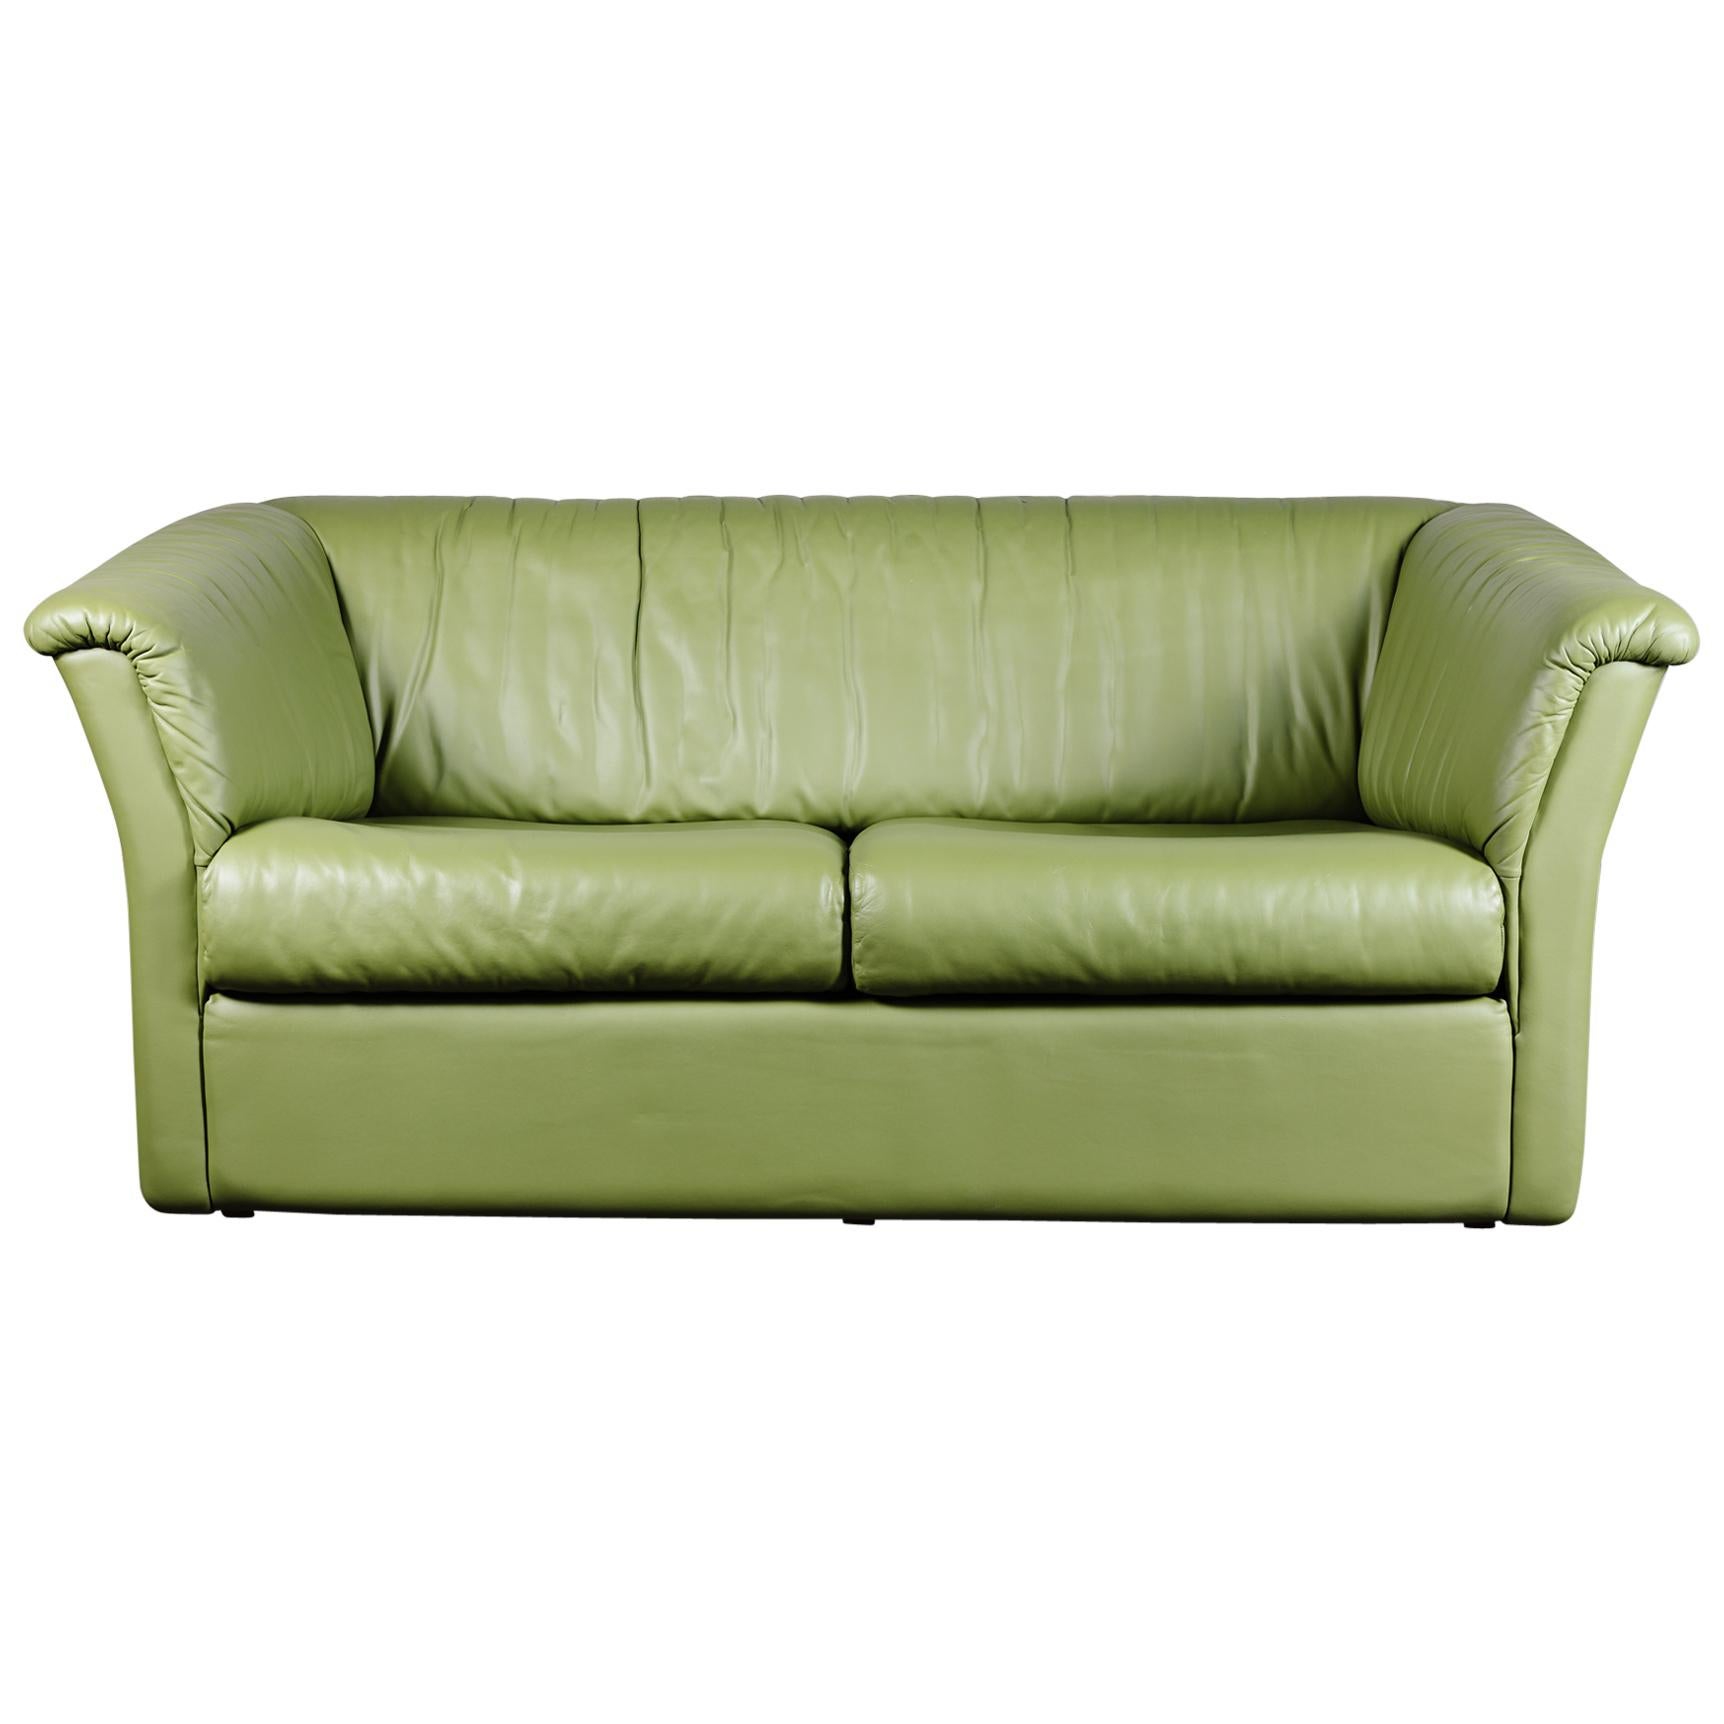 Chic Mid-Century Modern Green Leather Sofa / Loveseat by De Sede